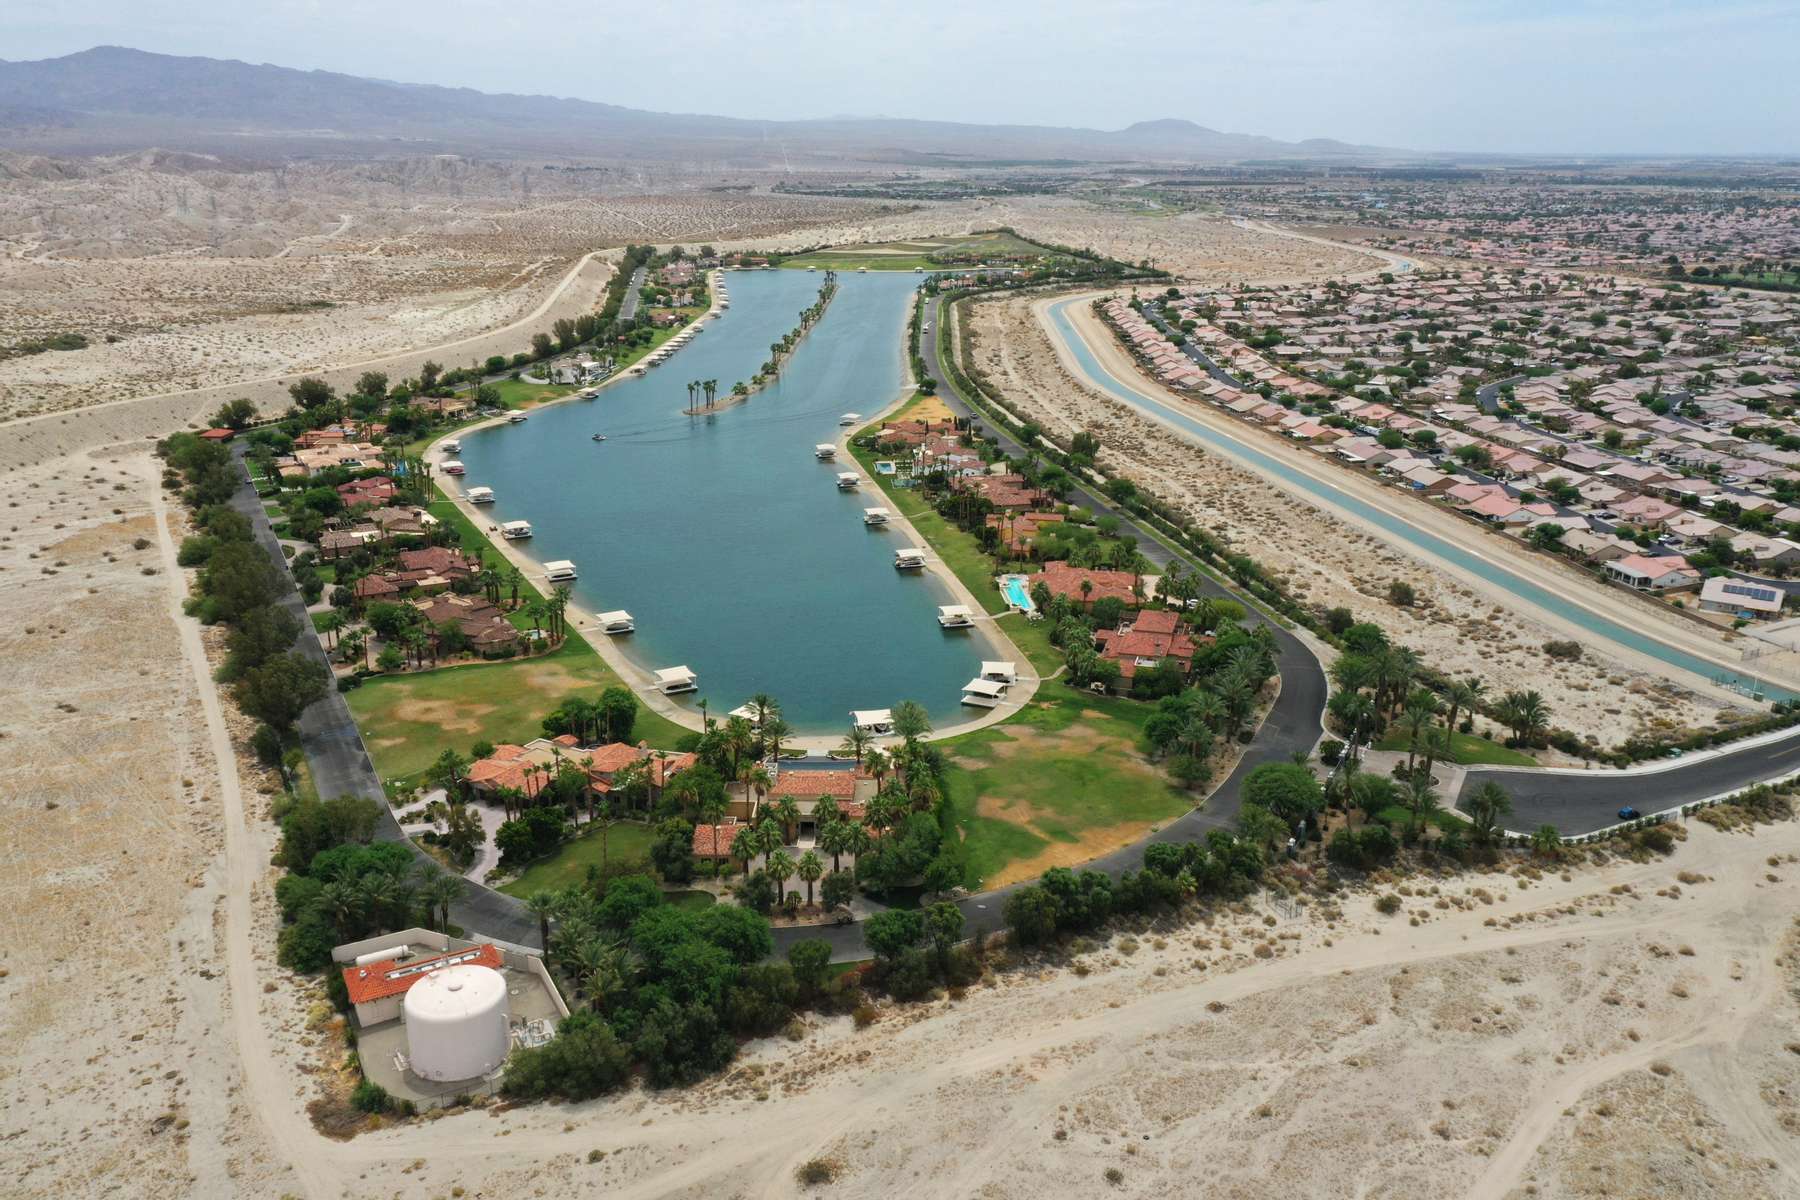 An aerial view shows the artificial lake, Shadow Lake Estates, next to desert landscape as California faces its worst drought since 1977, in Palm Springs, California, U.S., June 29, 2021. Picture taken with a drone June 29, 2021.